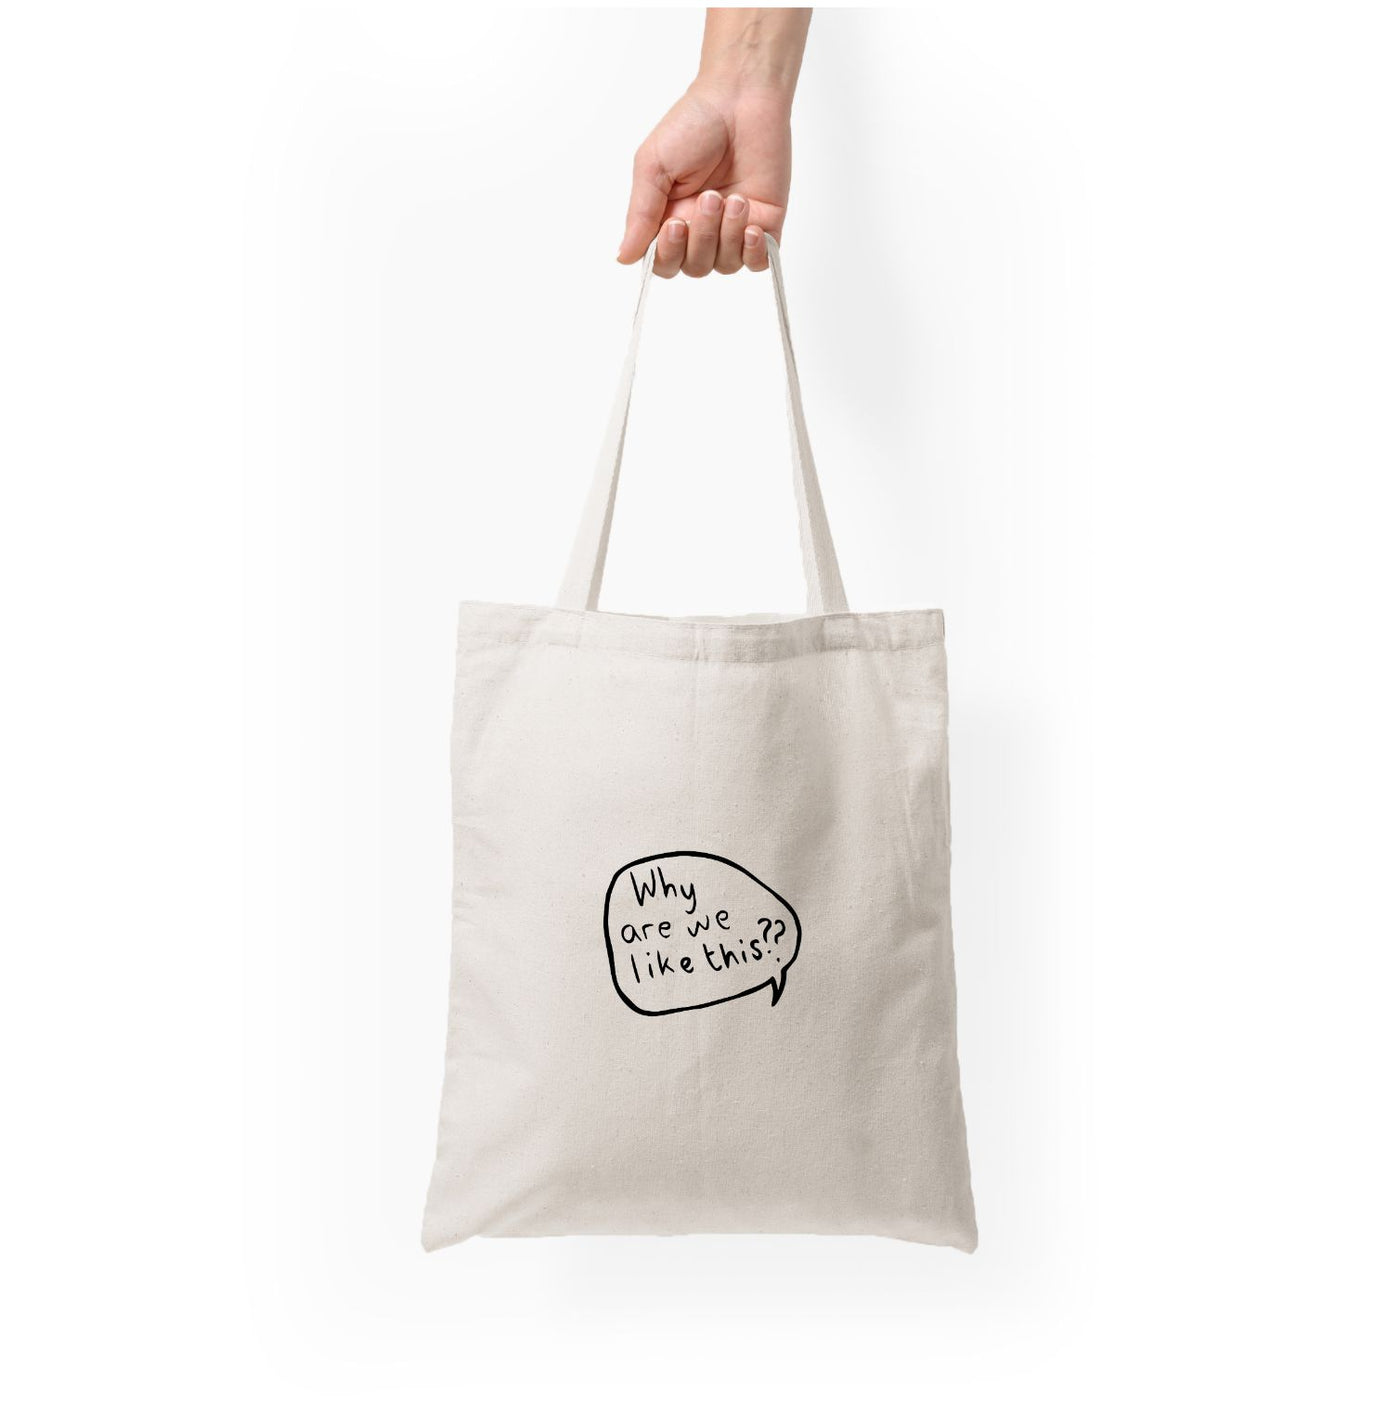 Why Are We Like This - Heartstopper Tote Bag